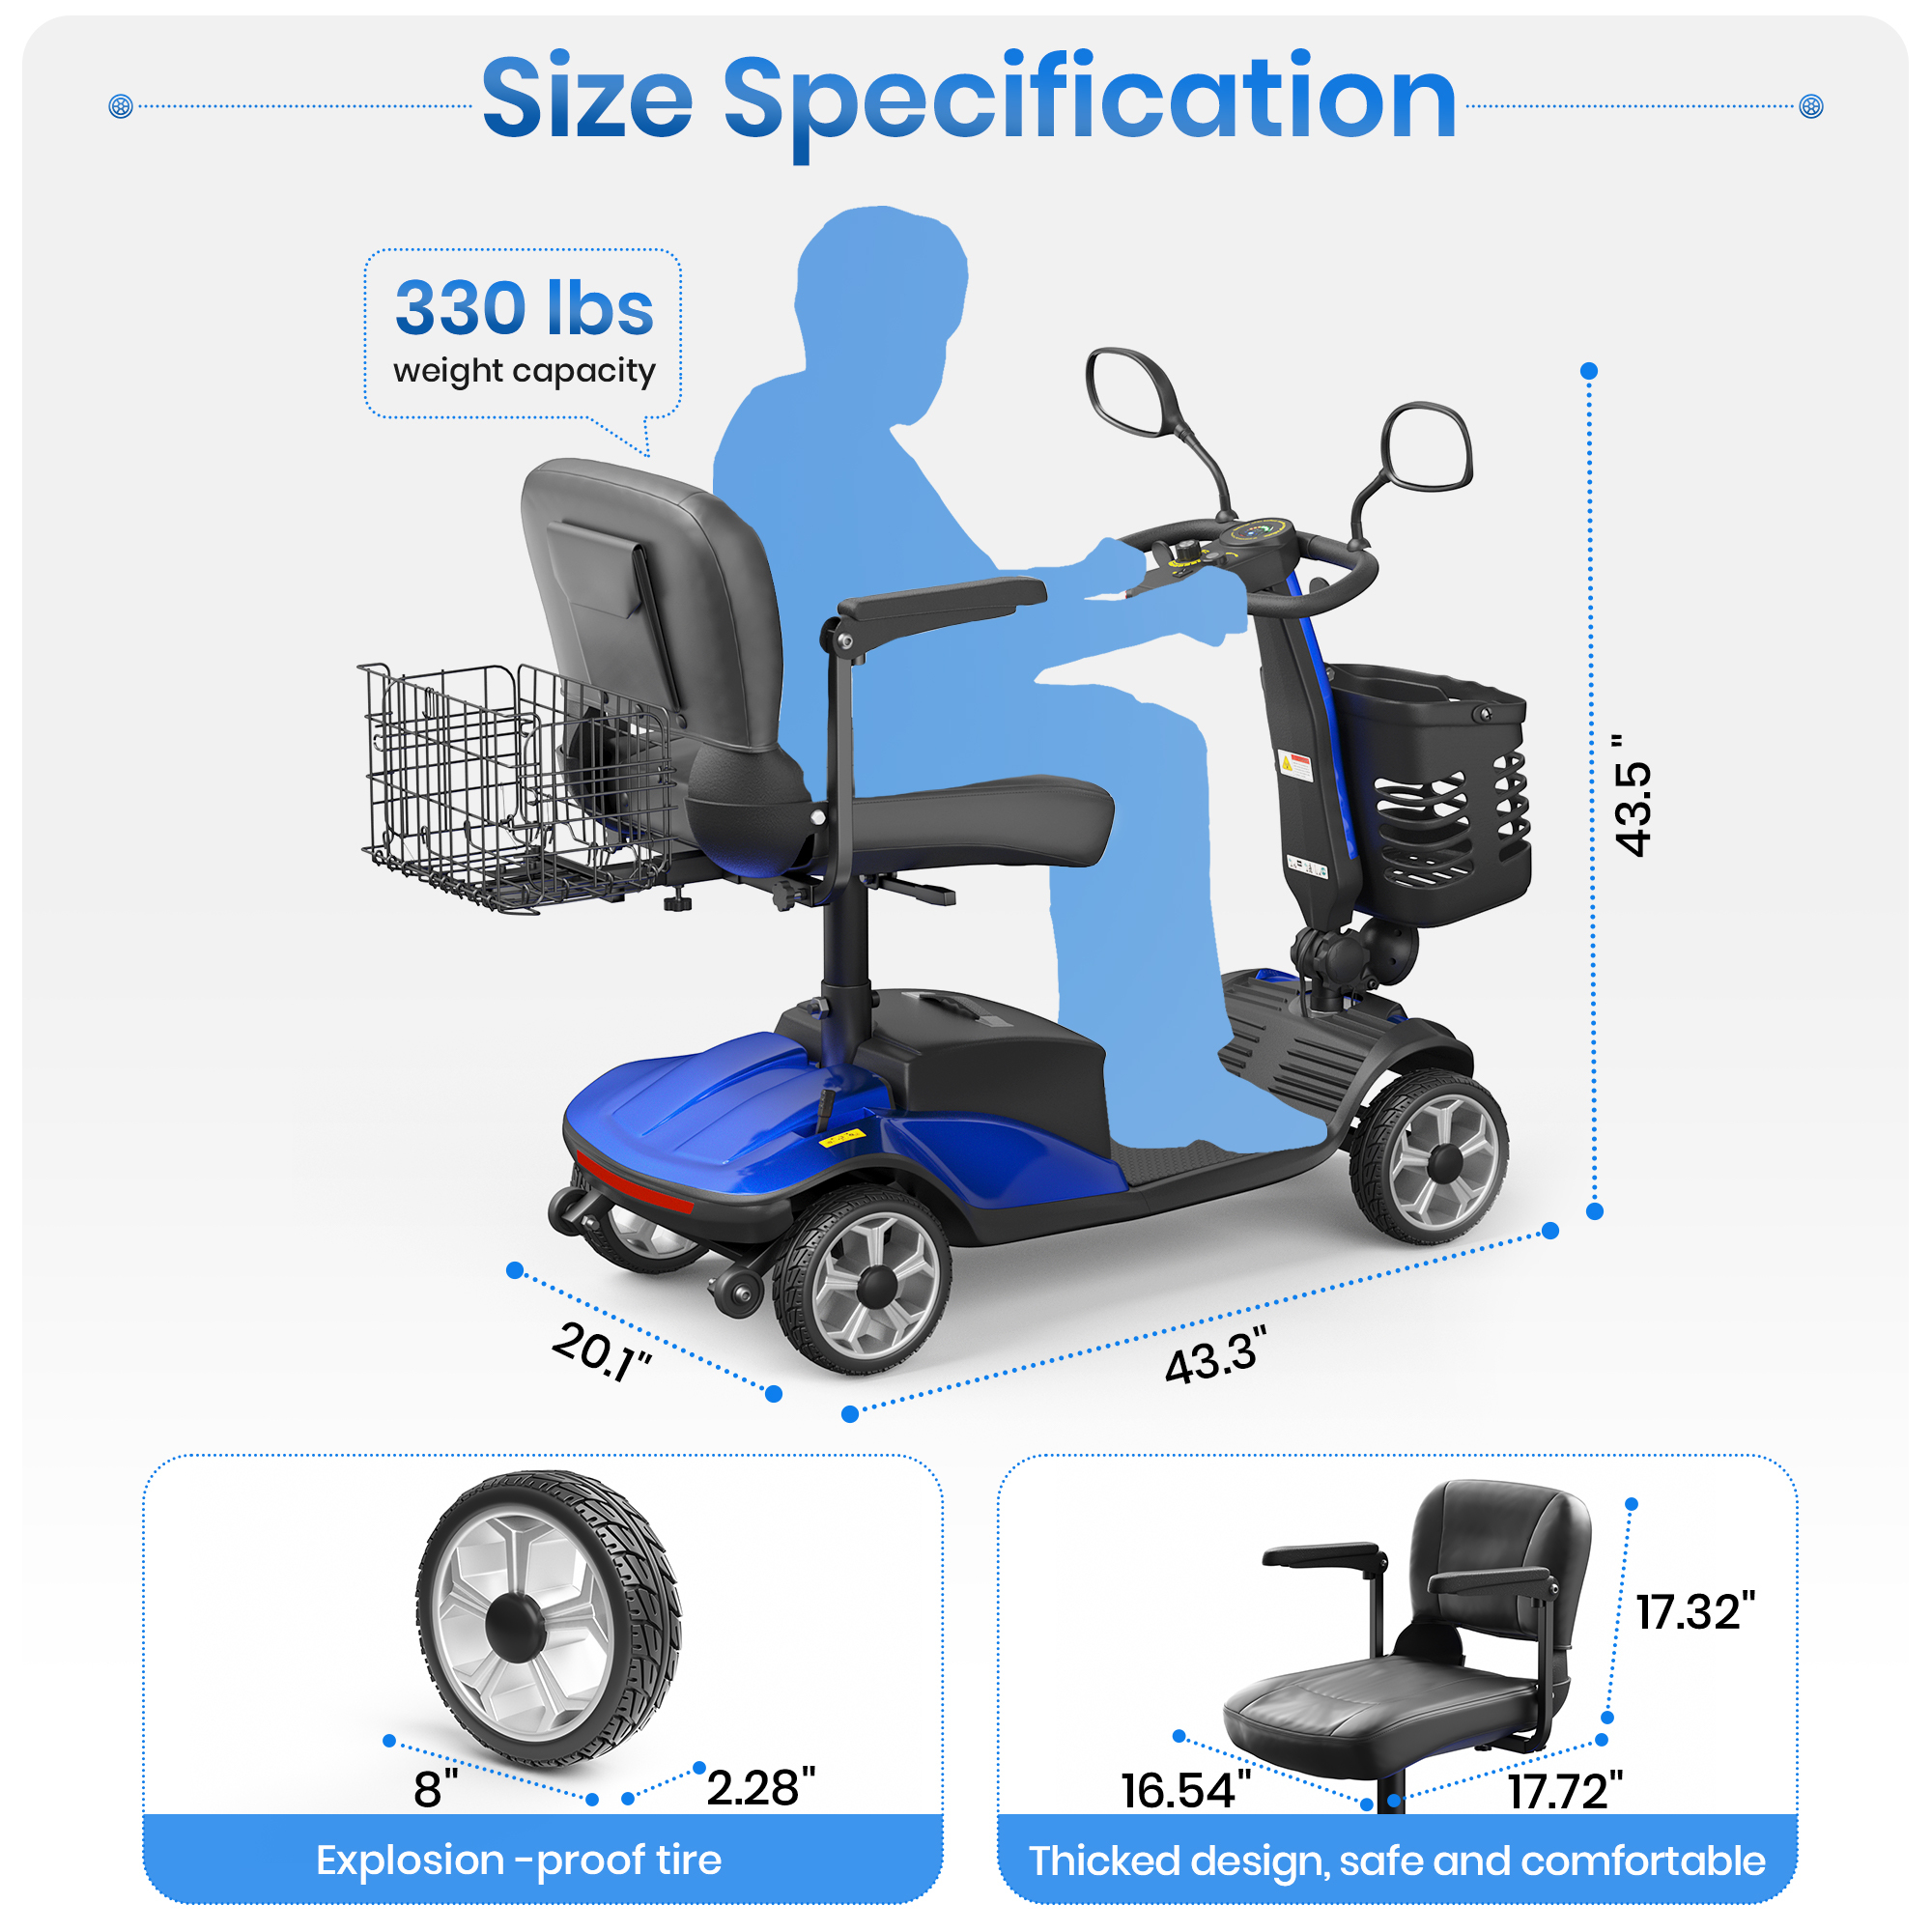 SACVON Upgrade 4 Wheel Mobility Scooter for Seniors, Foldable Powered Mobile Wheelchair for Adult 330lbs, Blue - image 5 of 10